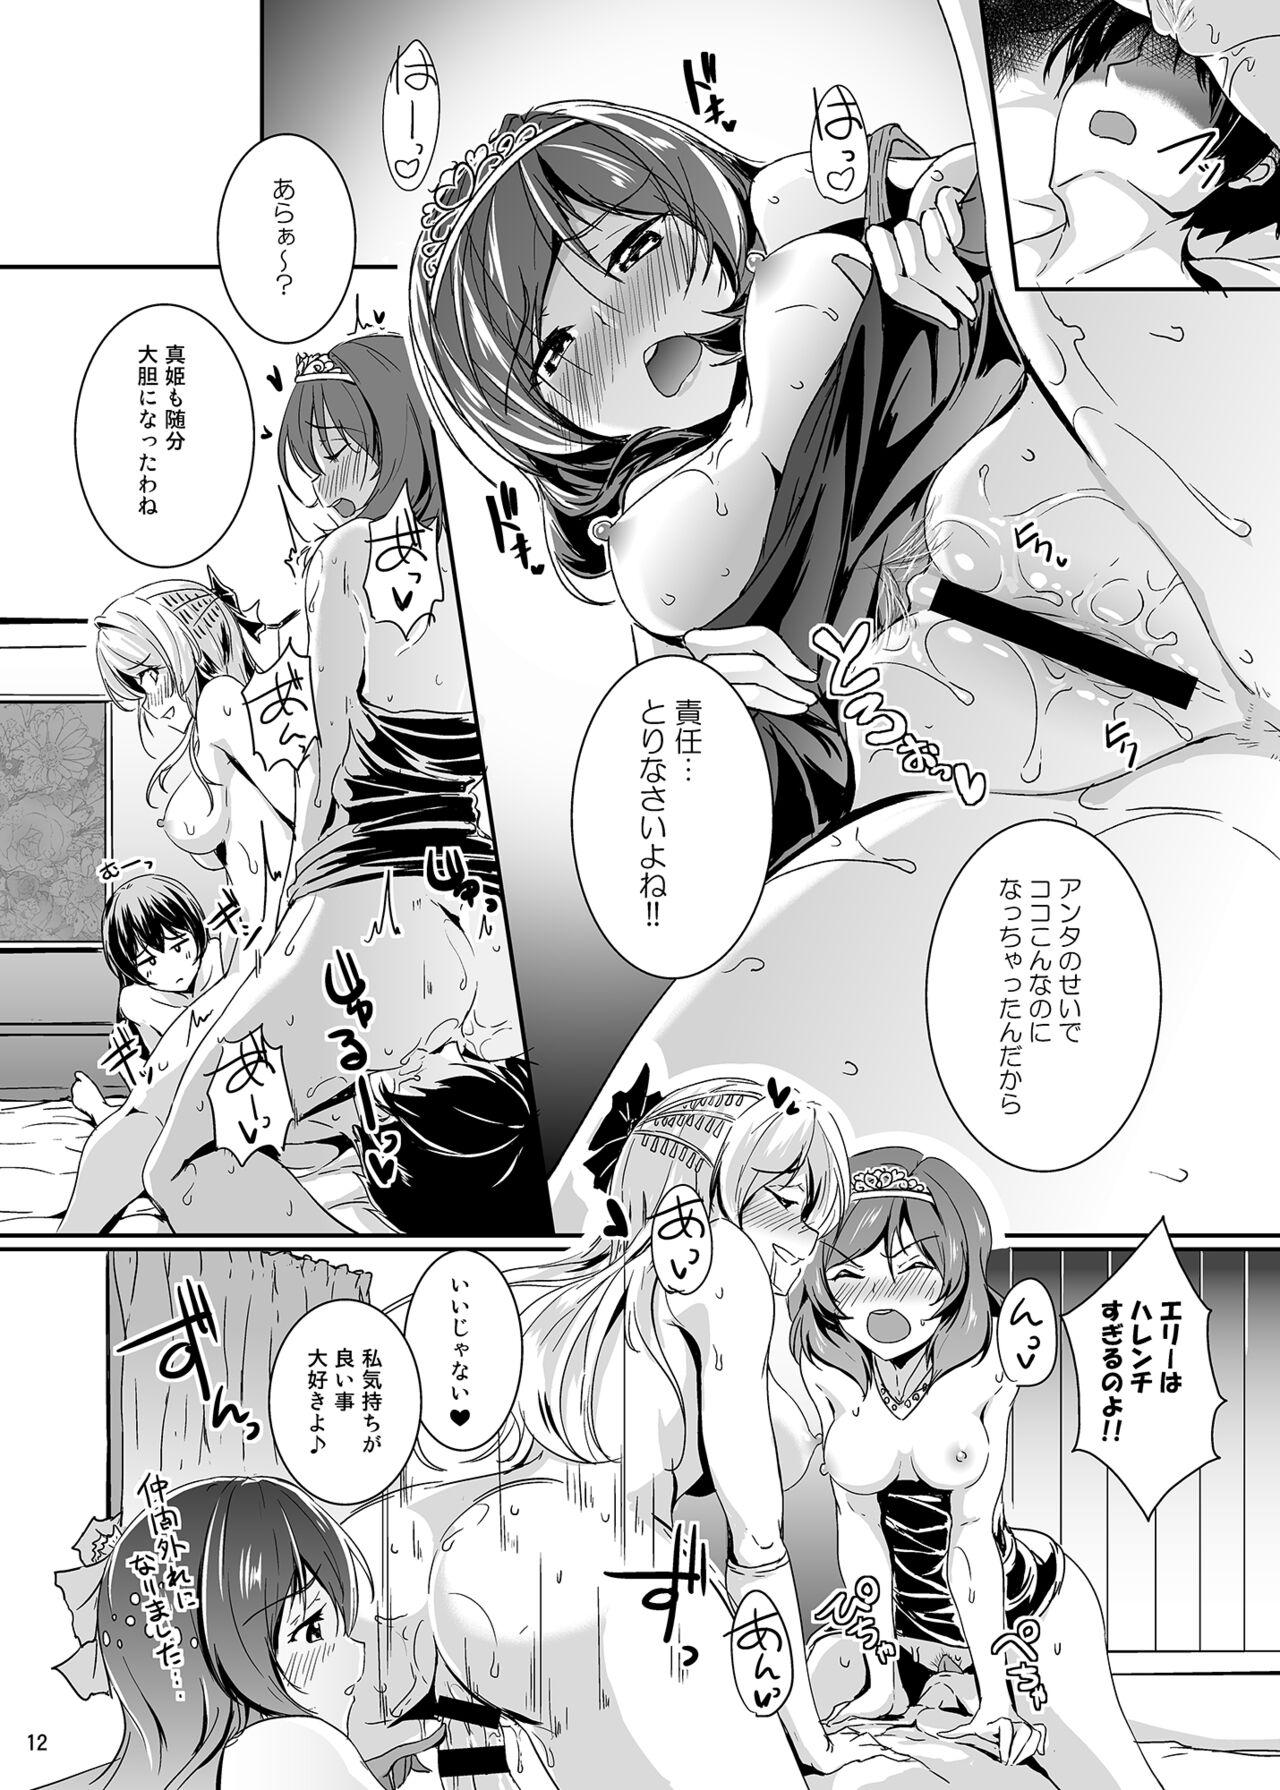 Indo secret in my heart - Love live Jap - Page 12